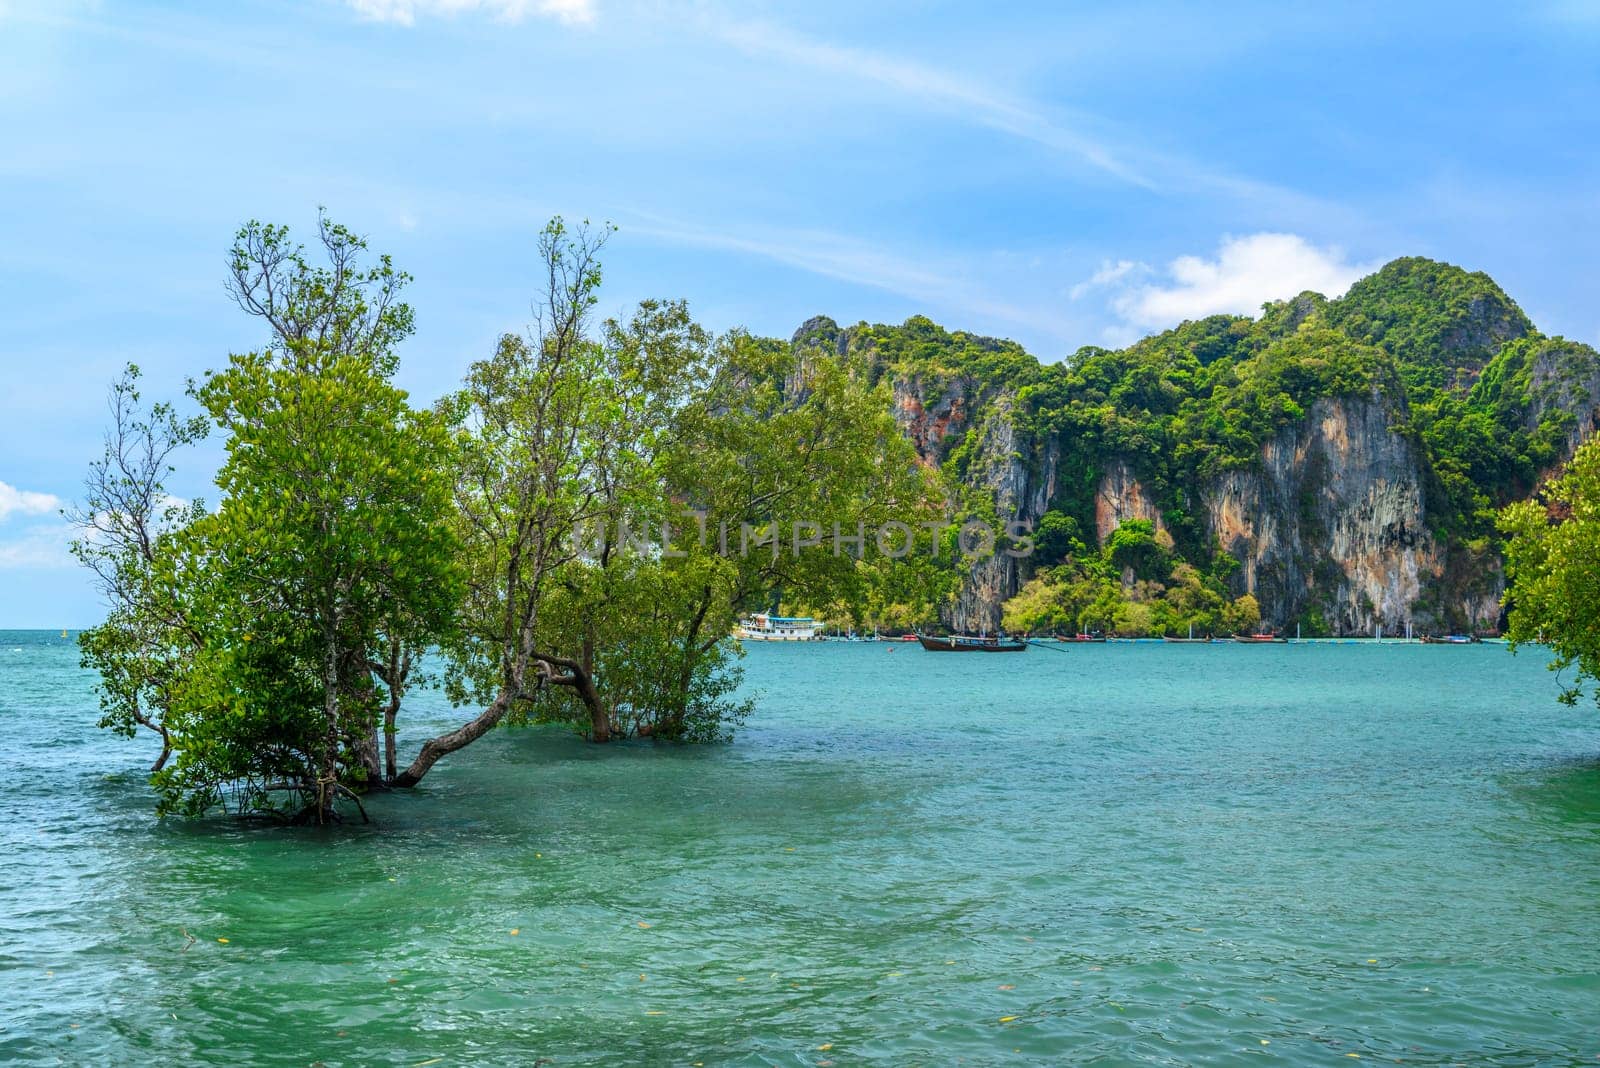 Tropical trees are growing in azure water with cliffs and rocks in the background, Ao Phra Nang Beach, Railay east Ao Nang, Krabi, Thailand by Eagle2308